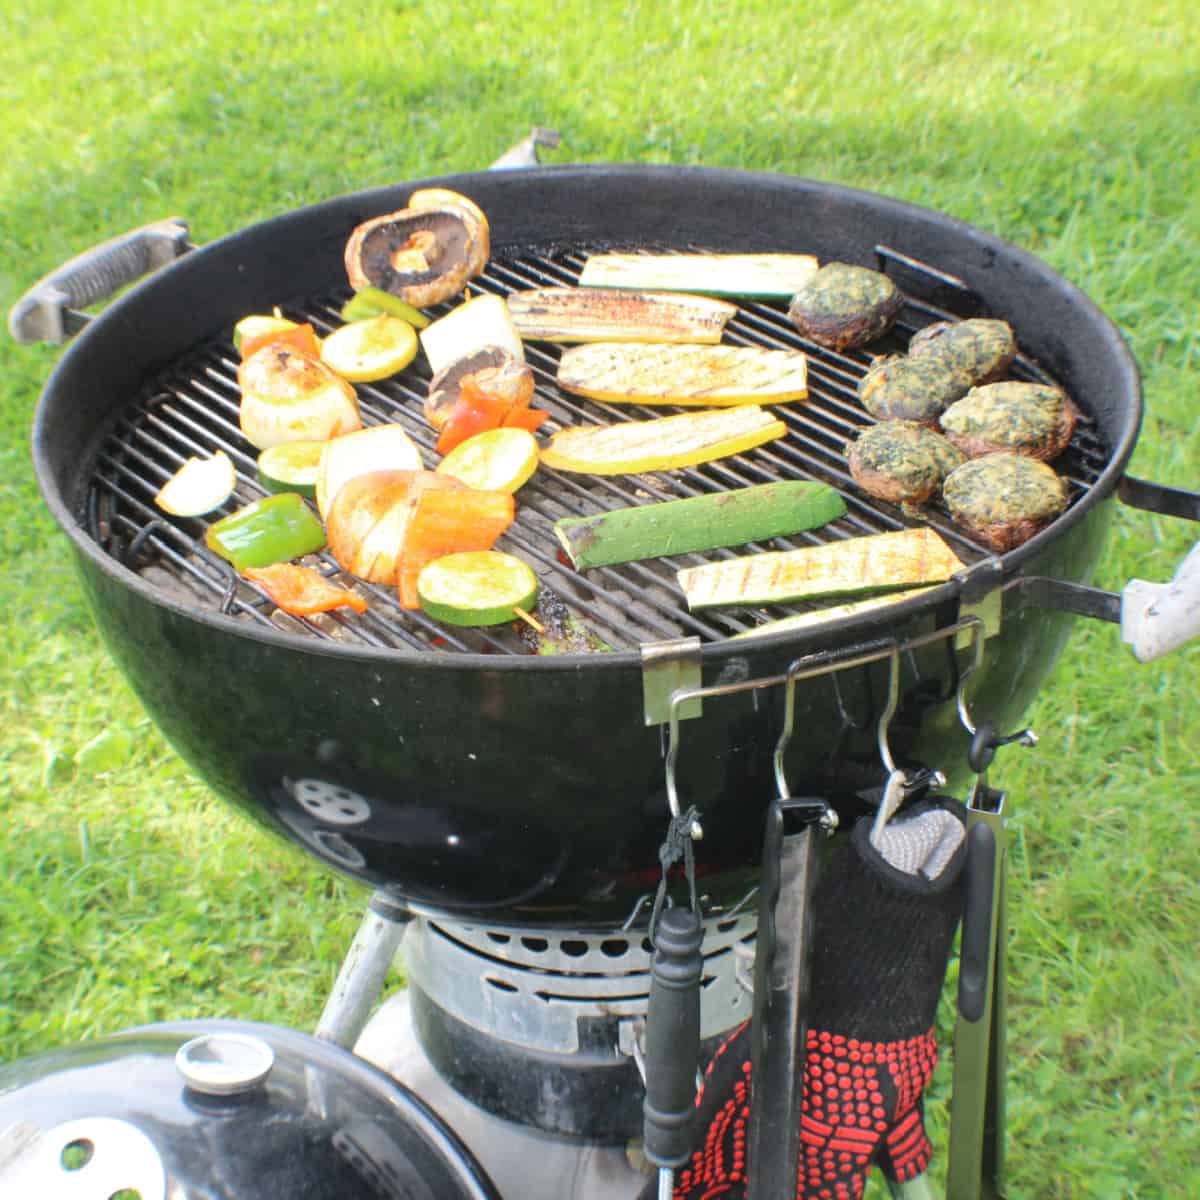 weber charcoal grill cooking meat and veggies